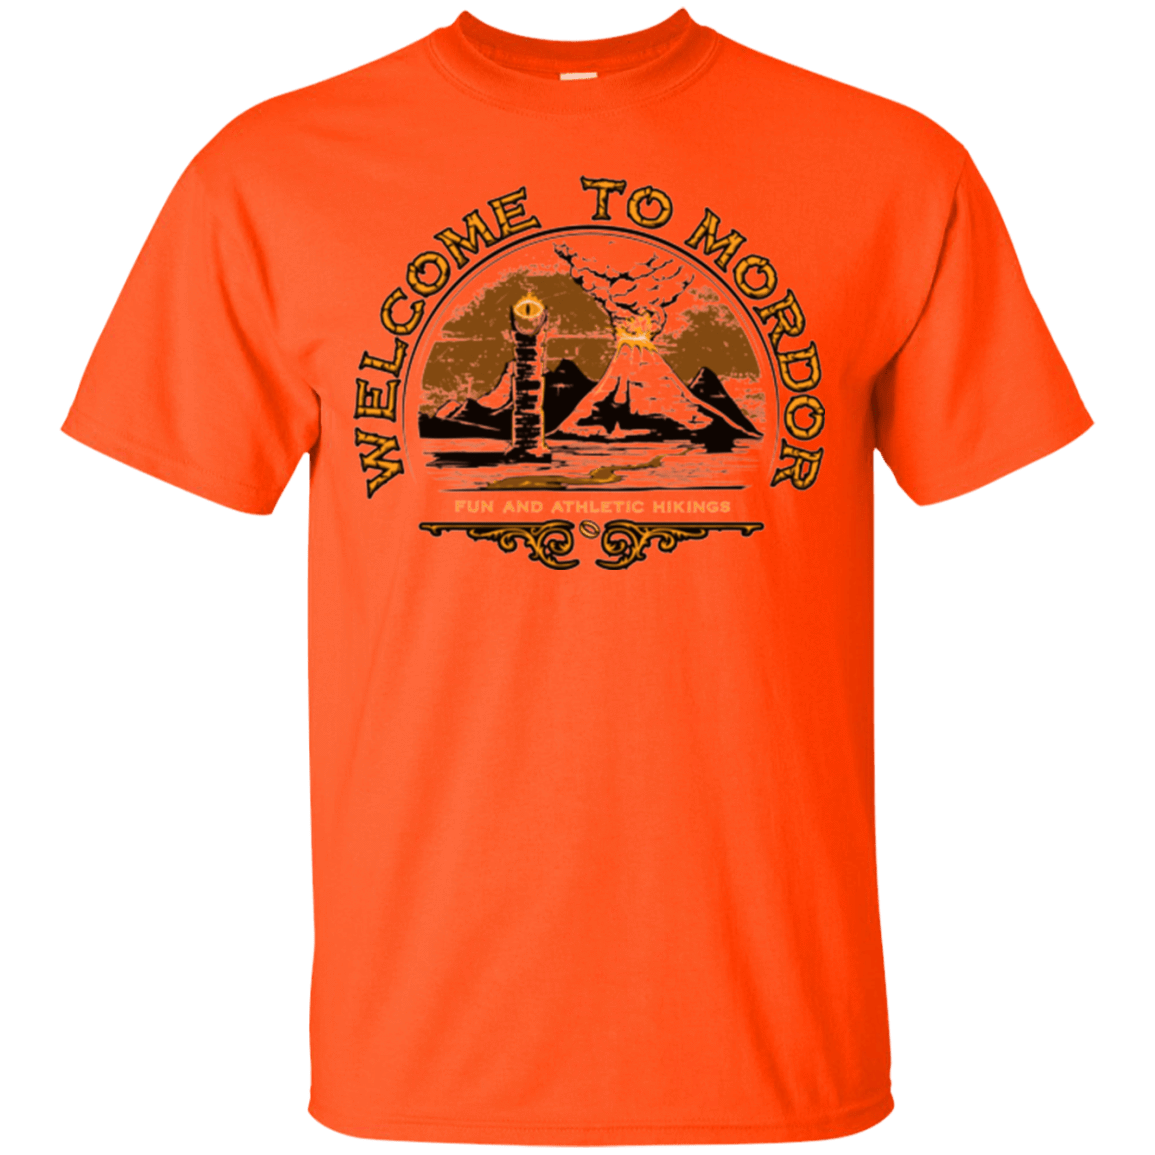 T-Shirts Orange / Small Welcome to Mordor T-Shirt